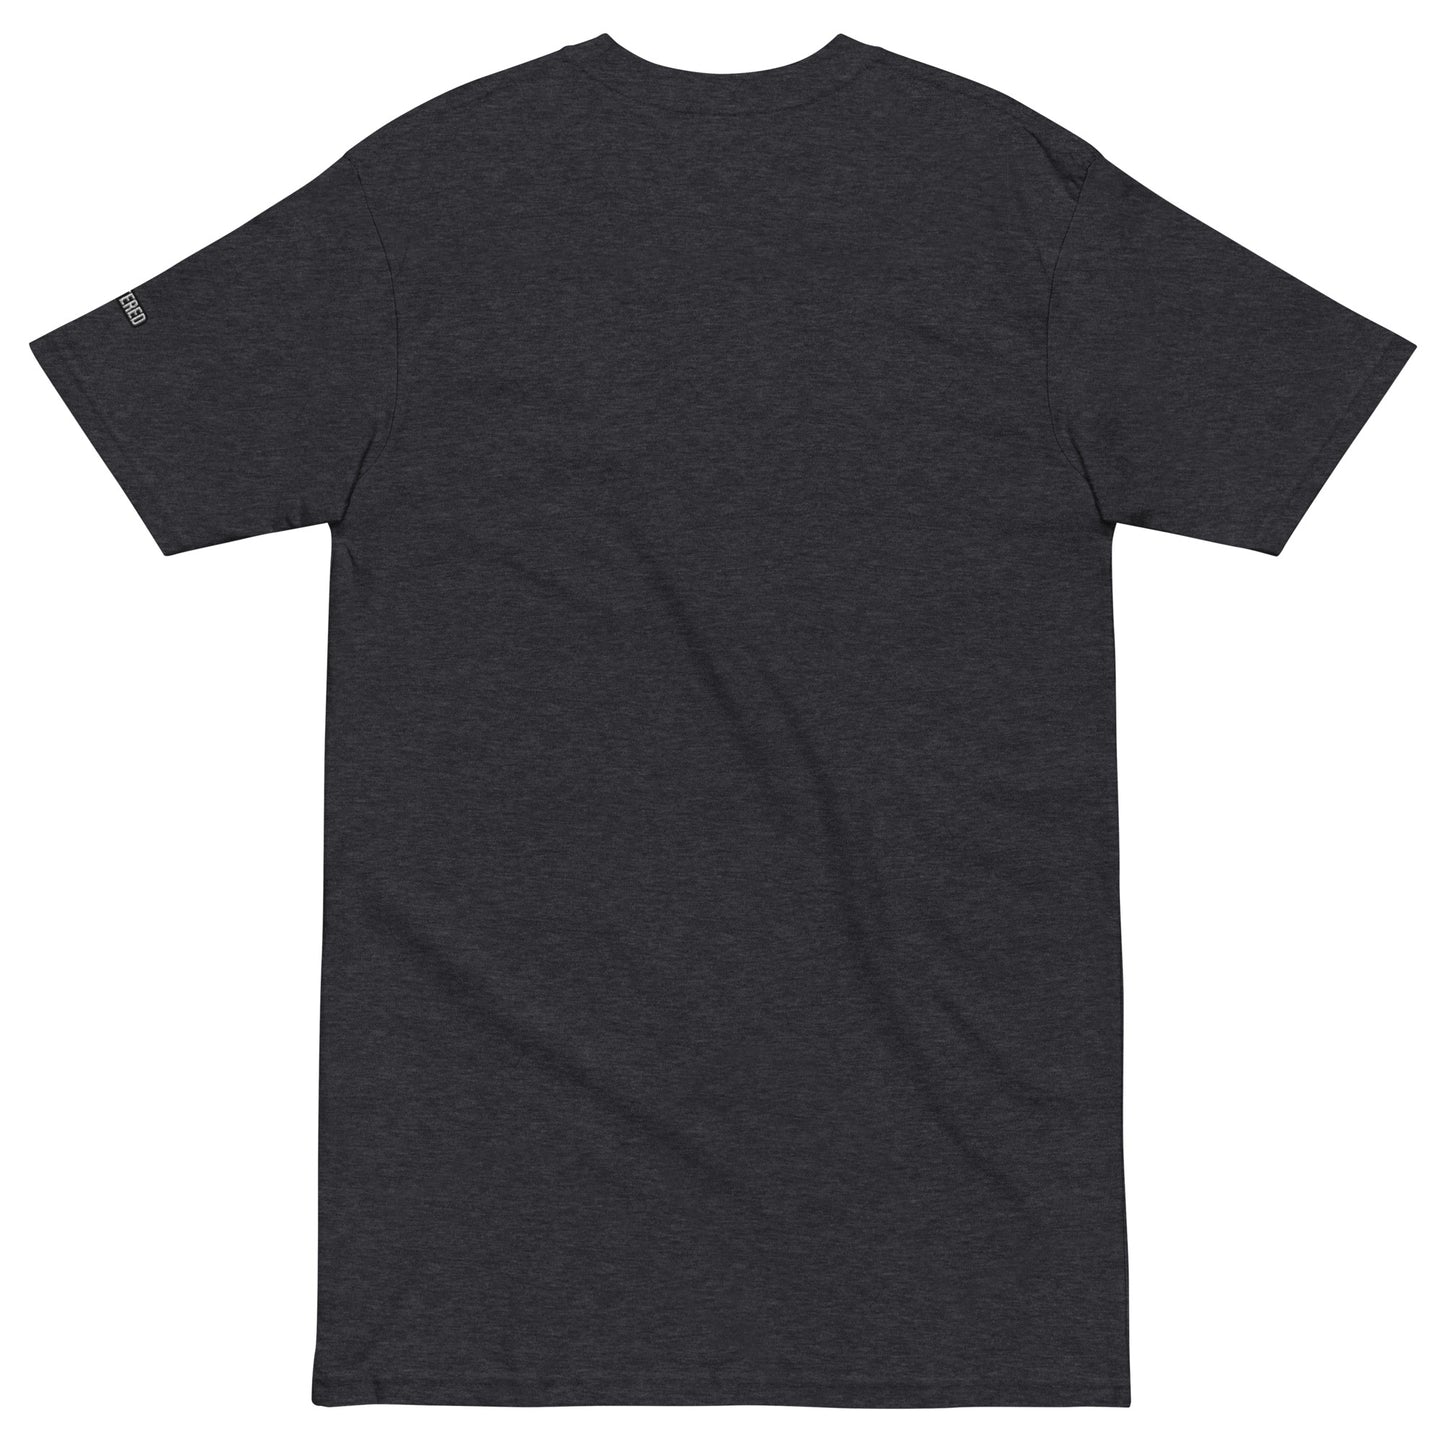 New York Apple Logo Embroidered Charcoal Grey T-Shirt Scattered Streetwear